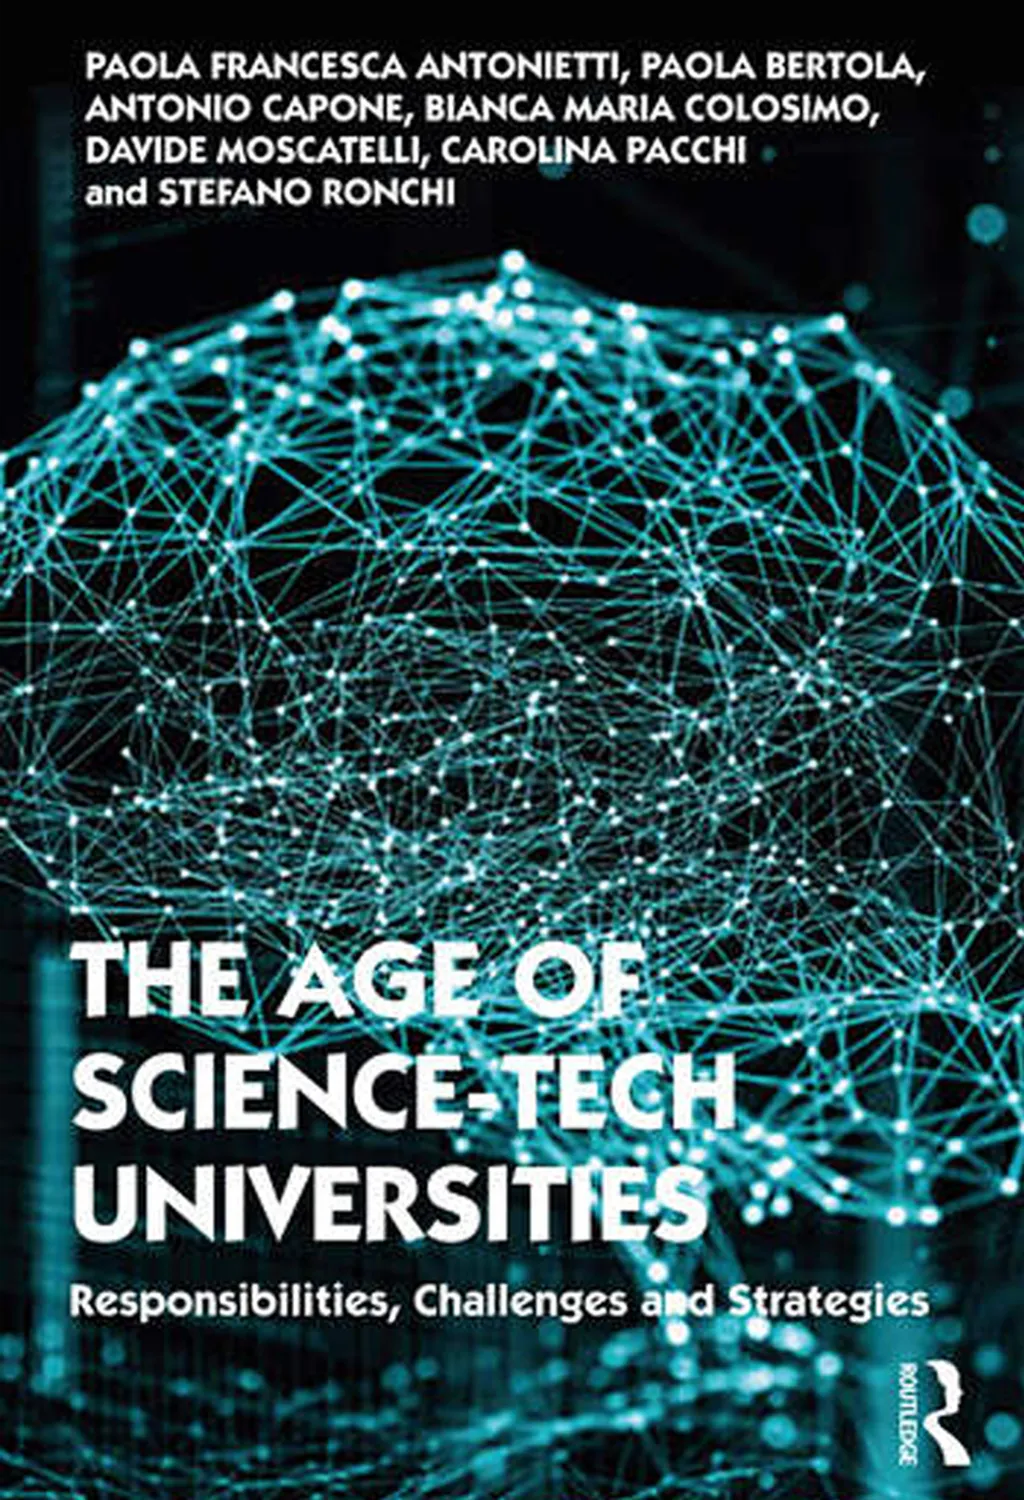 The age of science-tech Universities